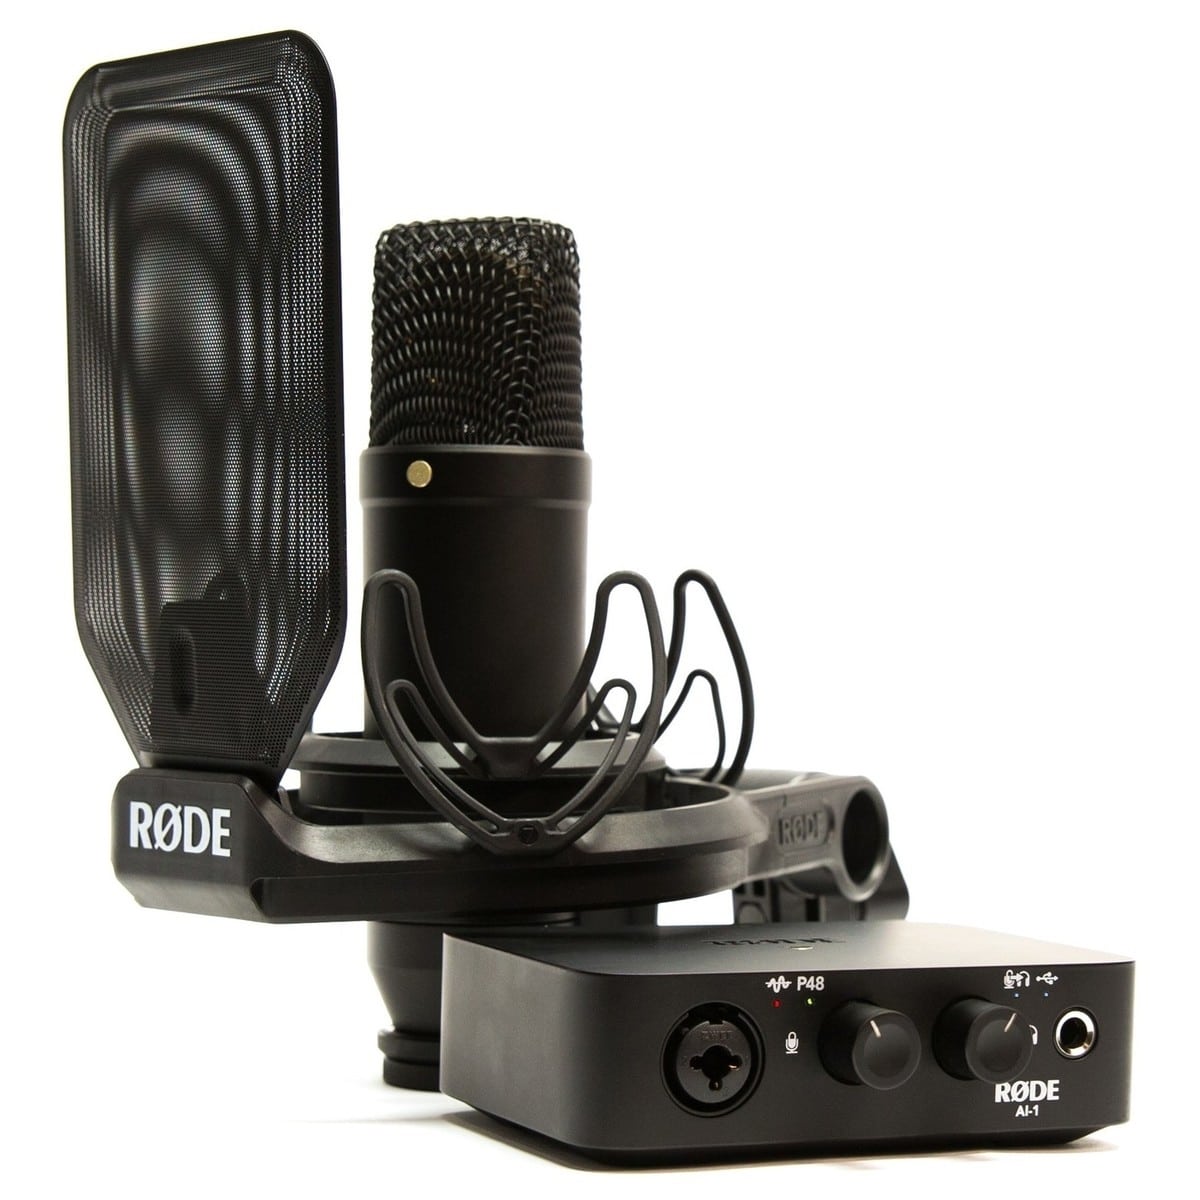 RODE NT1 CARDIOID CONDENSER MICROPHONE KIT